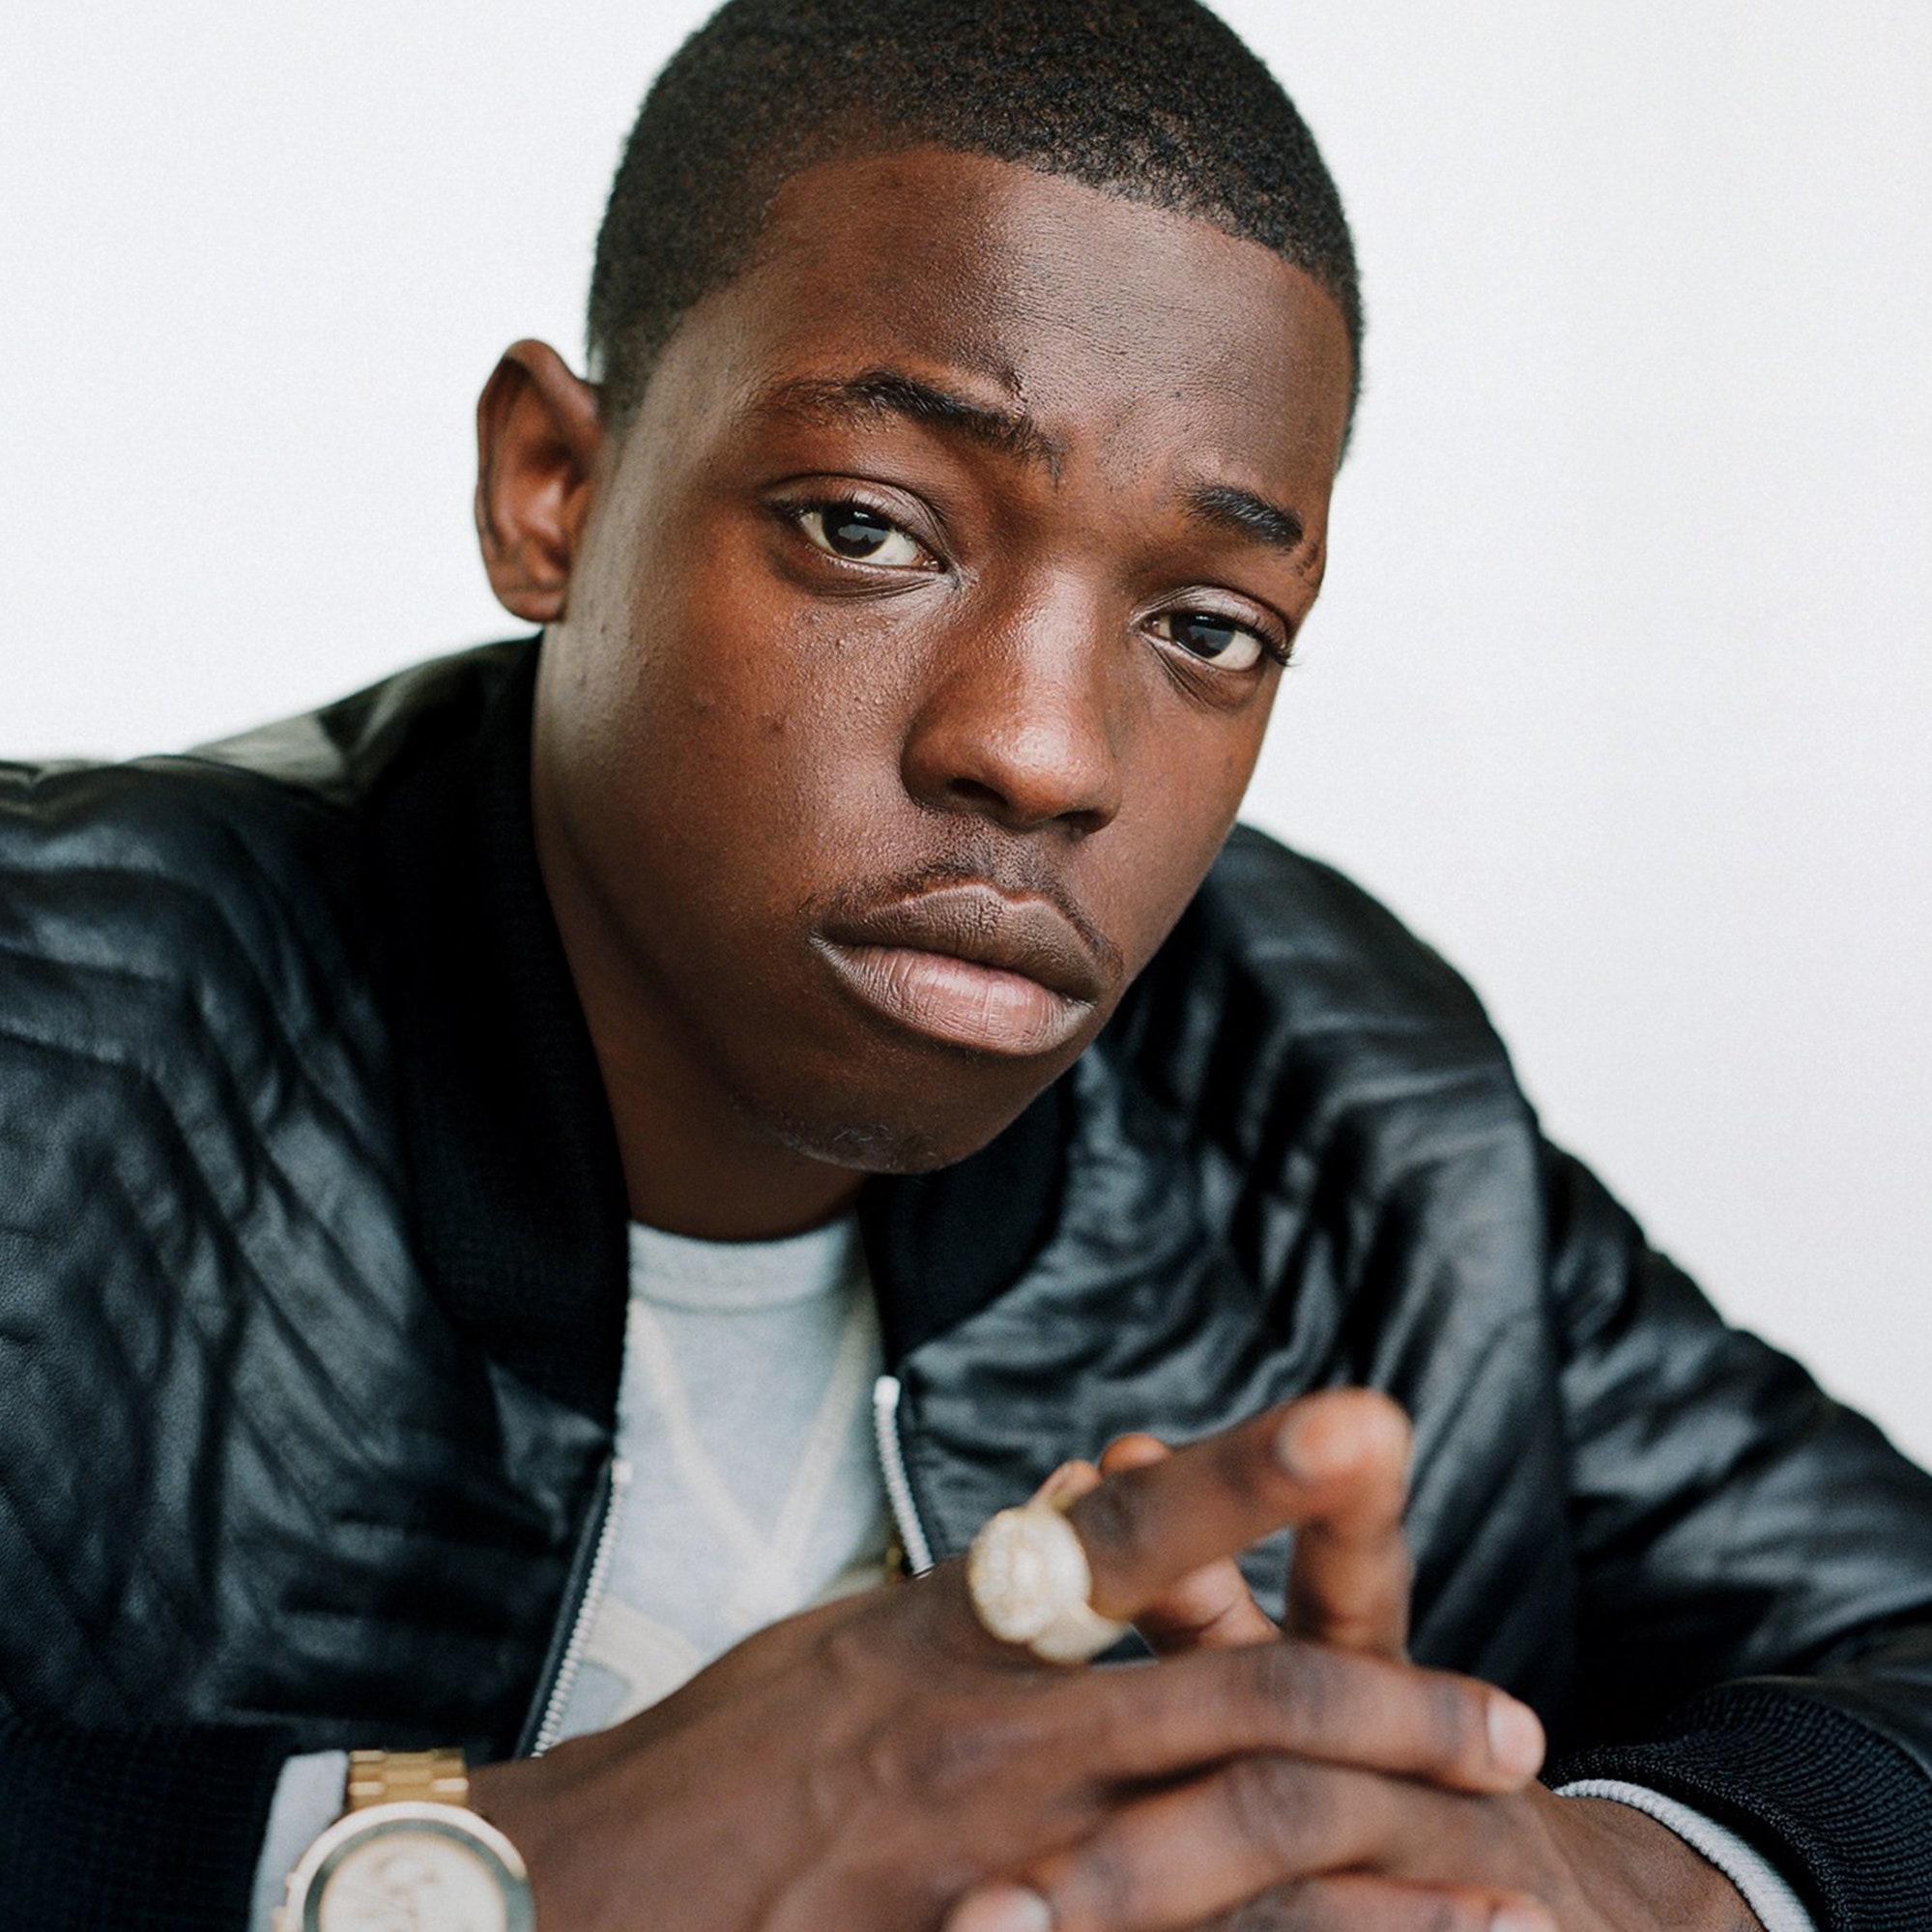 BOBBY SHMURDA EXPLAINS HIS ‘MIXED EMOTIONS’ ABOUT HIS FREEDOM